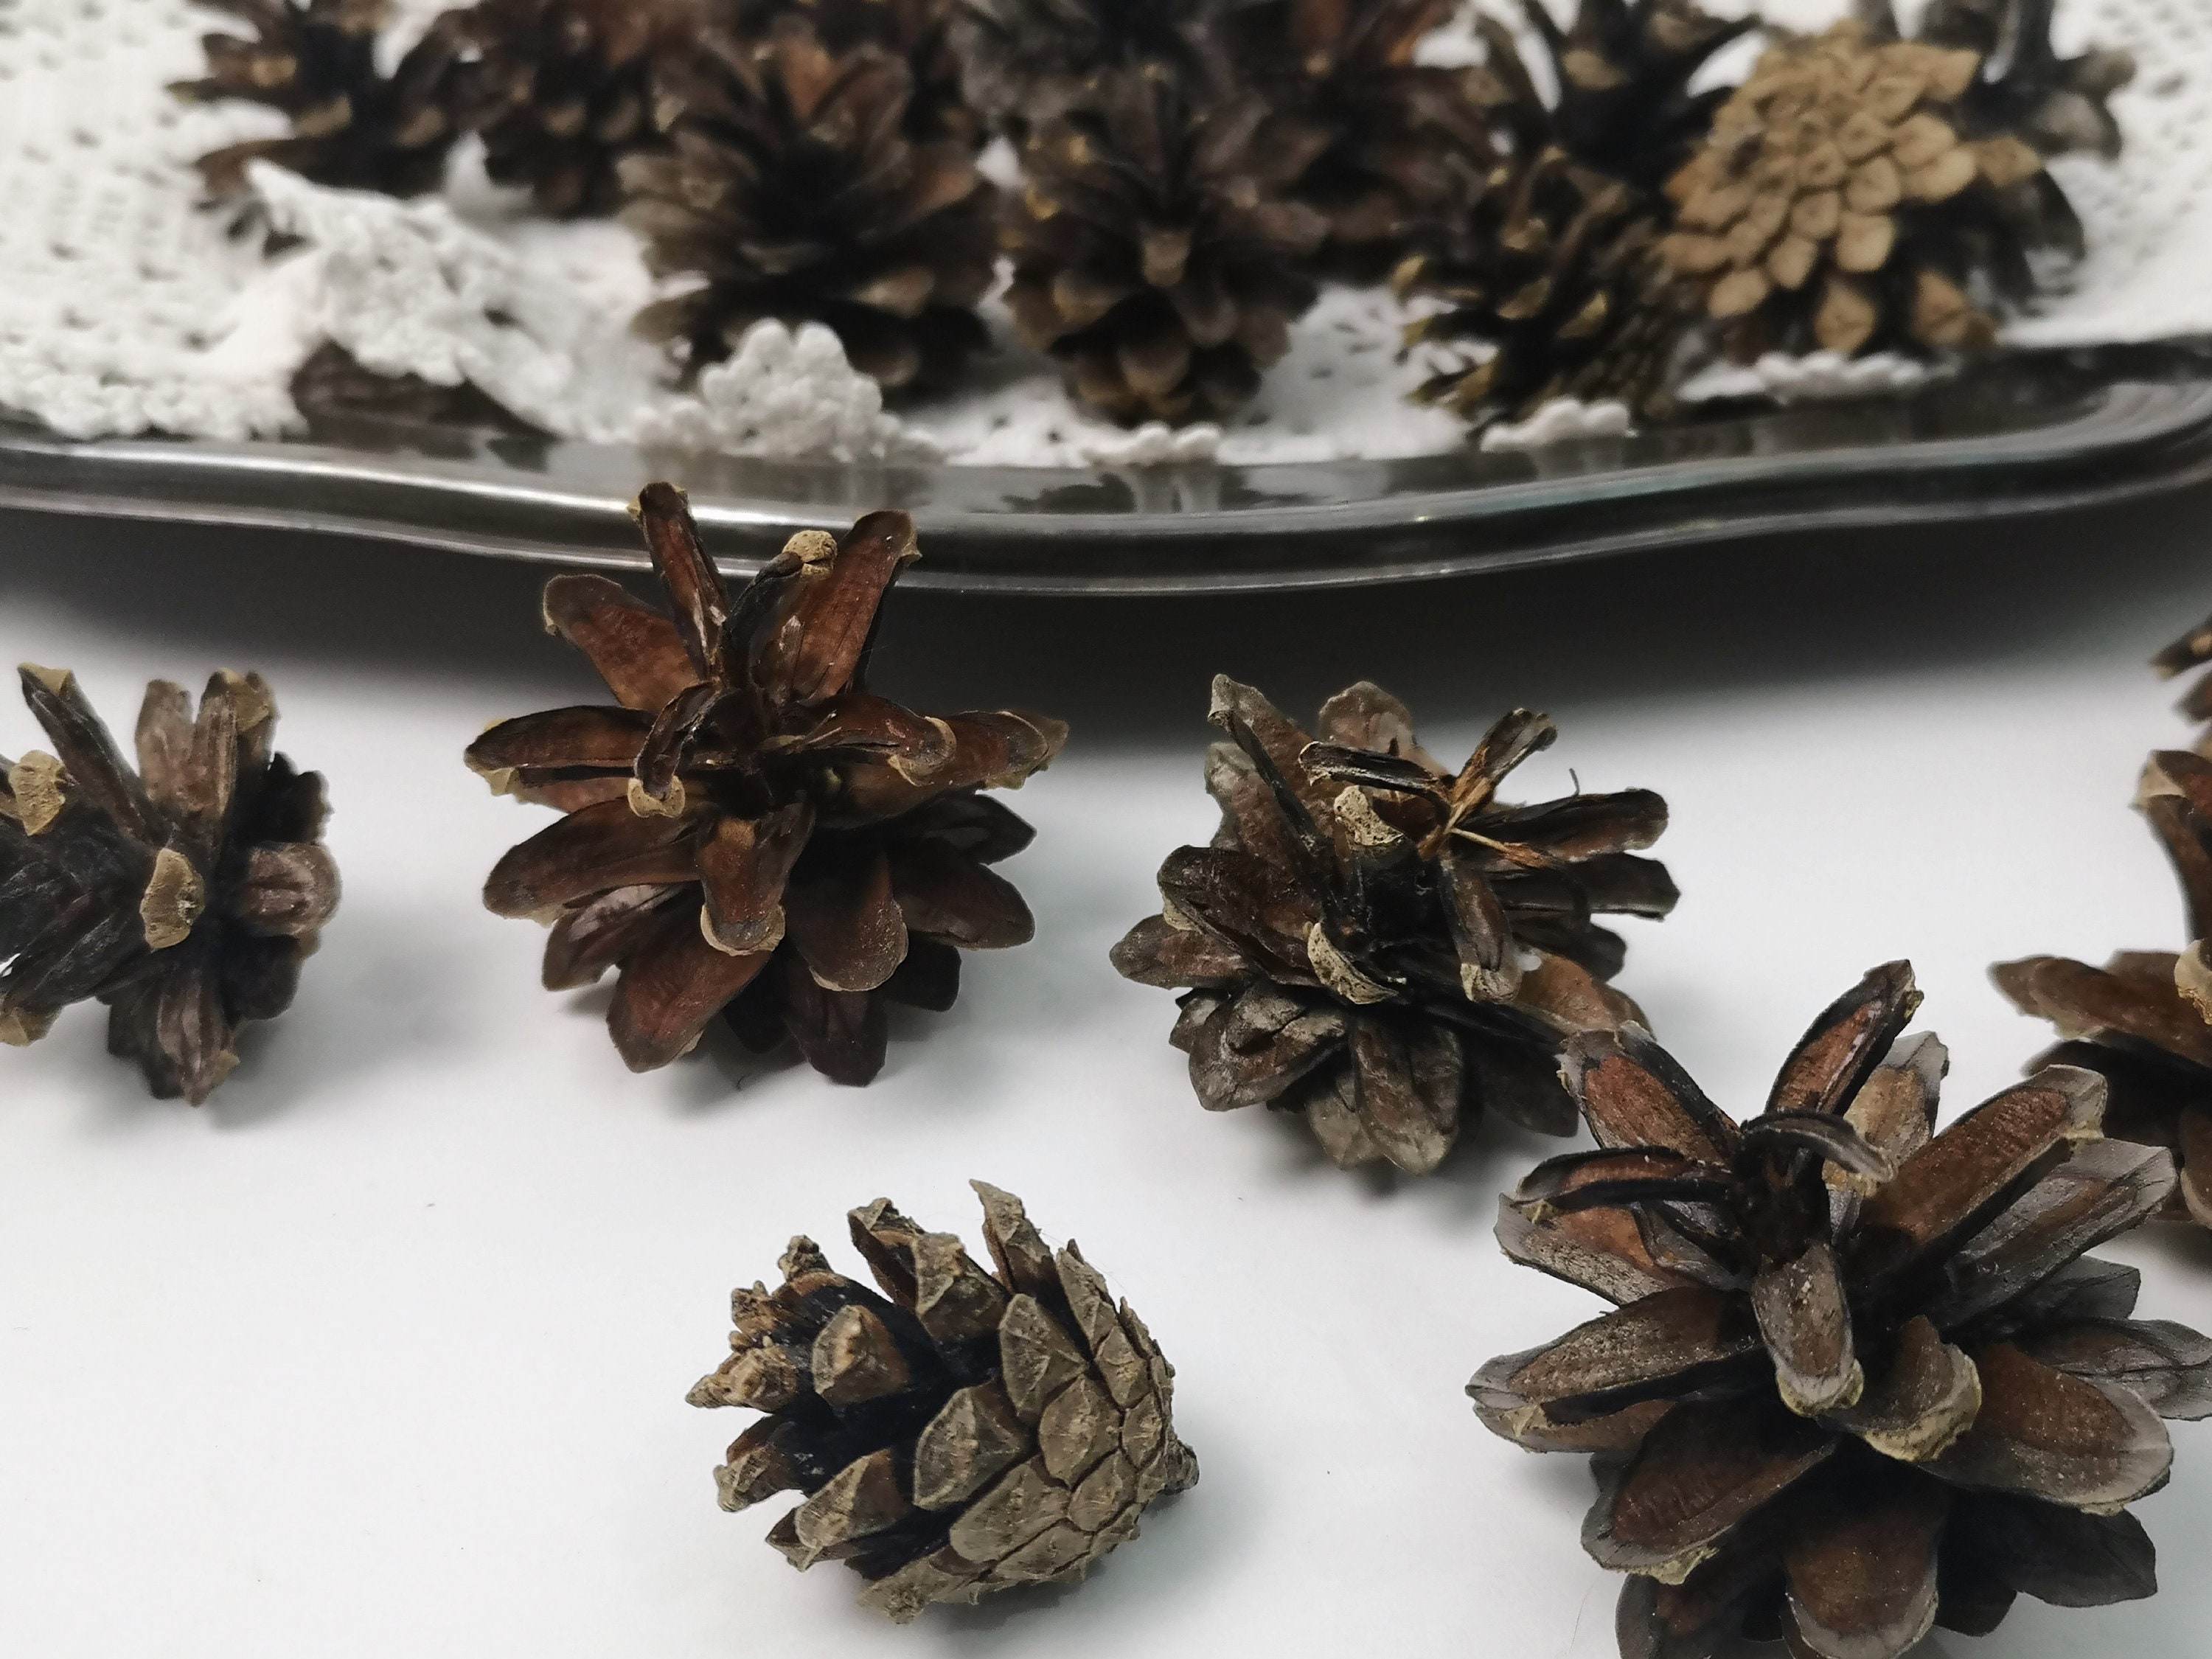 30pcs Small Pine Cones, Wreath Wooden Supplies, Floristic Materials for  Fall Weddings, Woodland Project Kit, Christmas Decoration Materials 